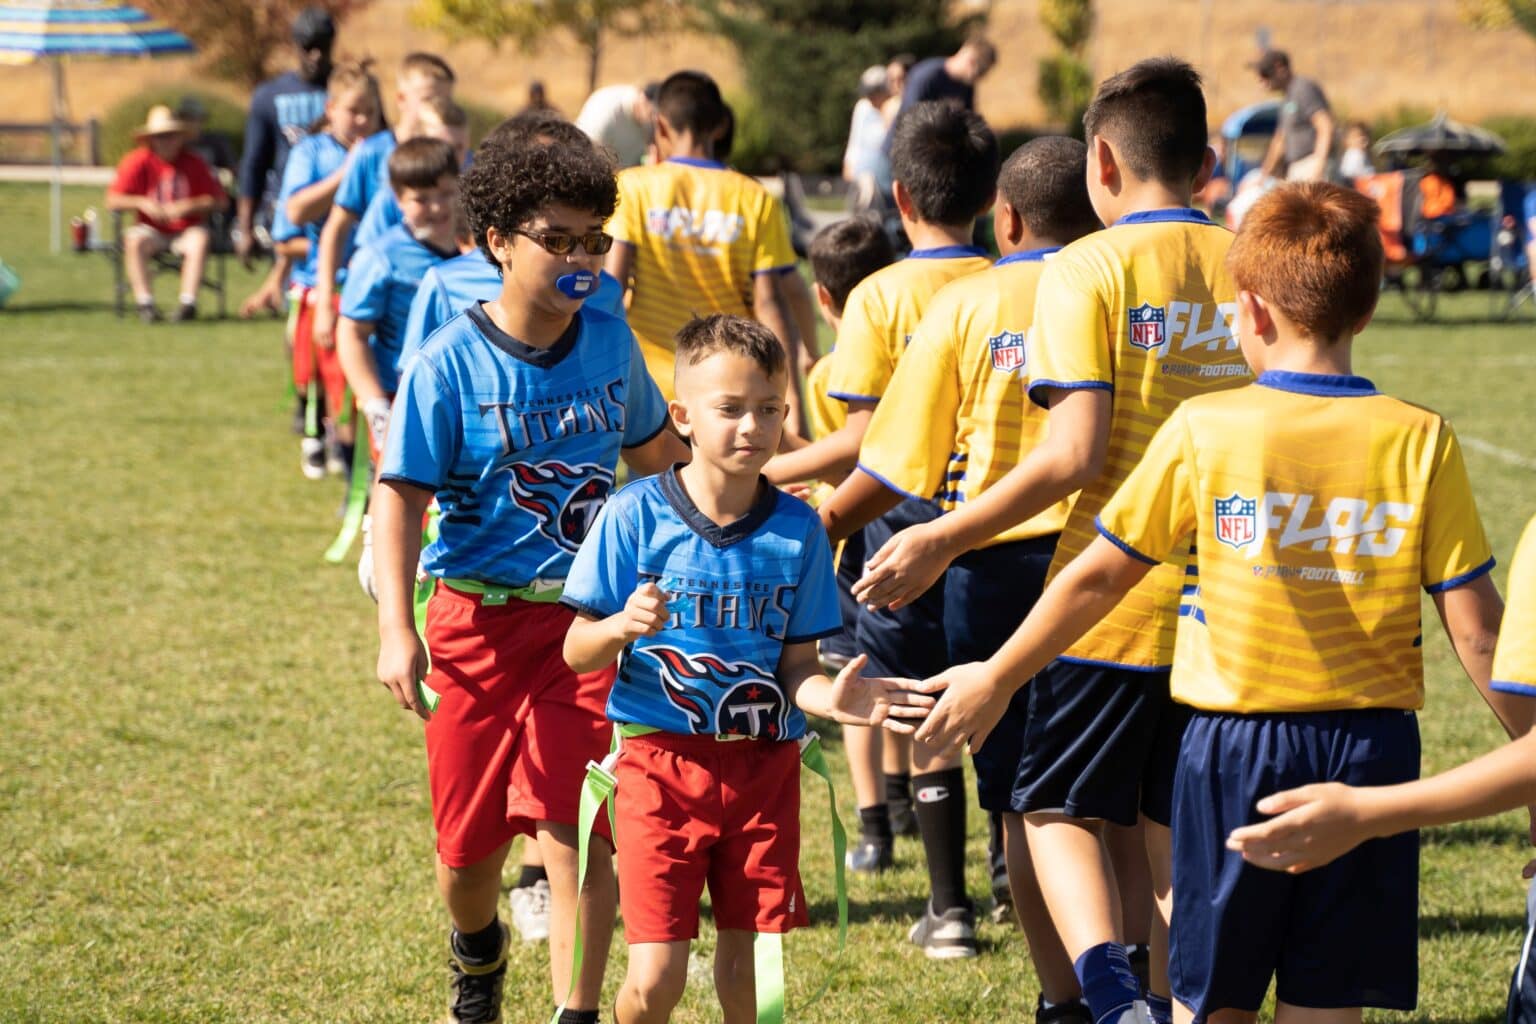 kids high-fiving other team after flag football game